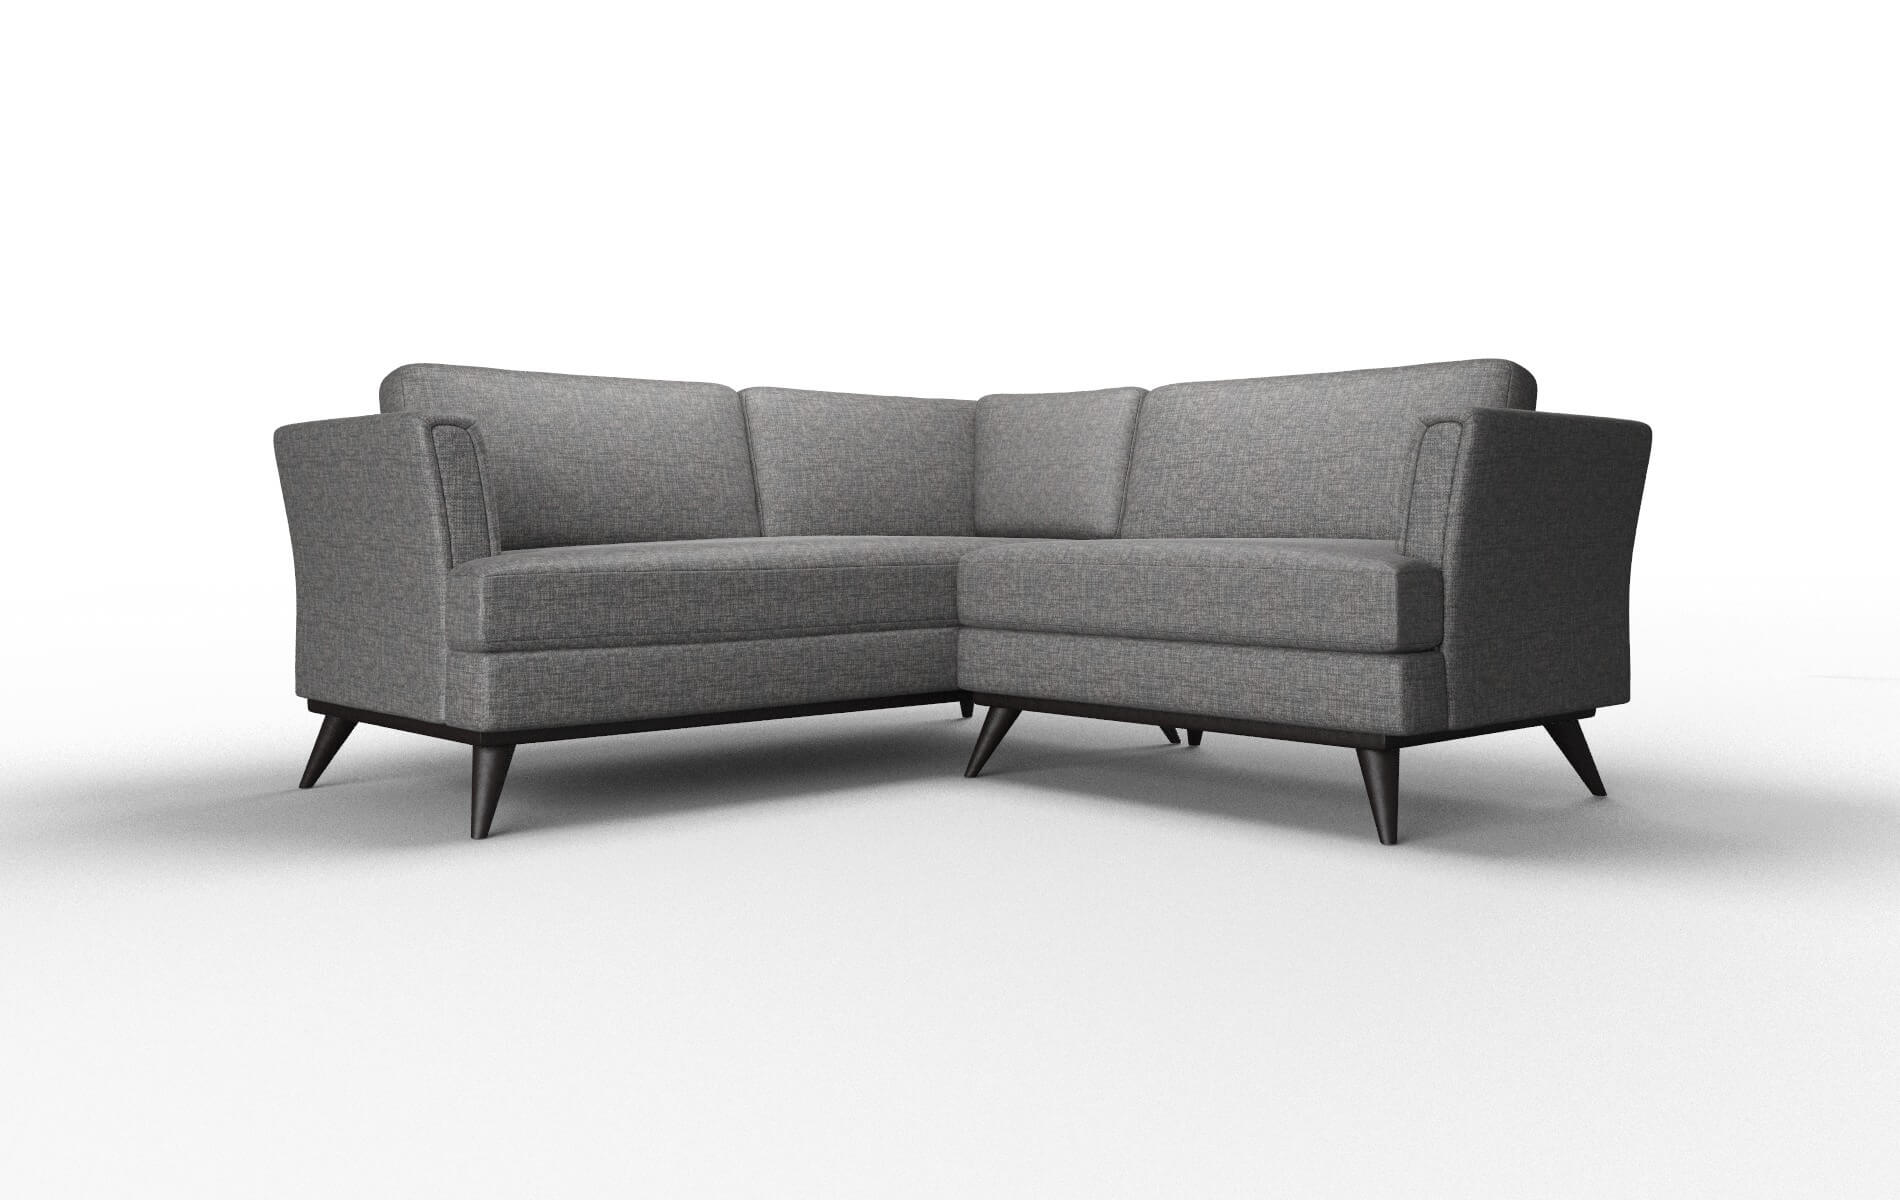 Antalya Curious Eclipse Sectional espresso legs